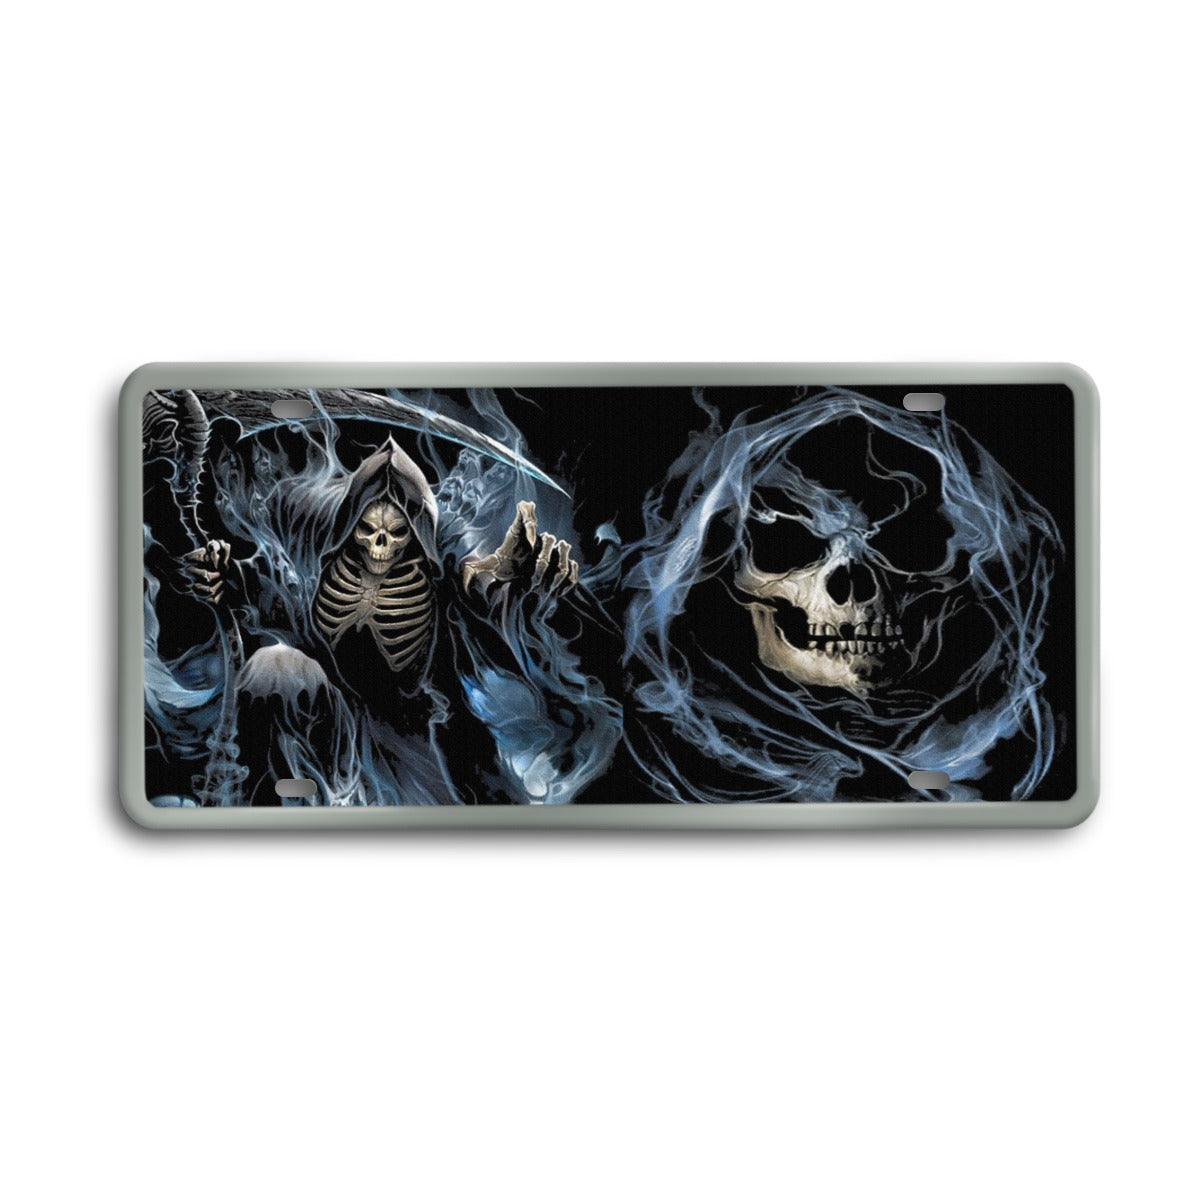 Grim reaper Vintage License Plate Decoration Painting, Horror Halloween gothic License Plate